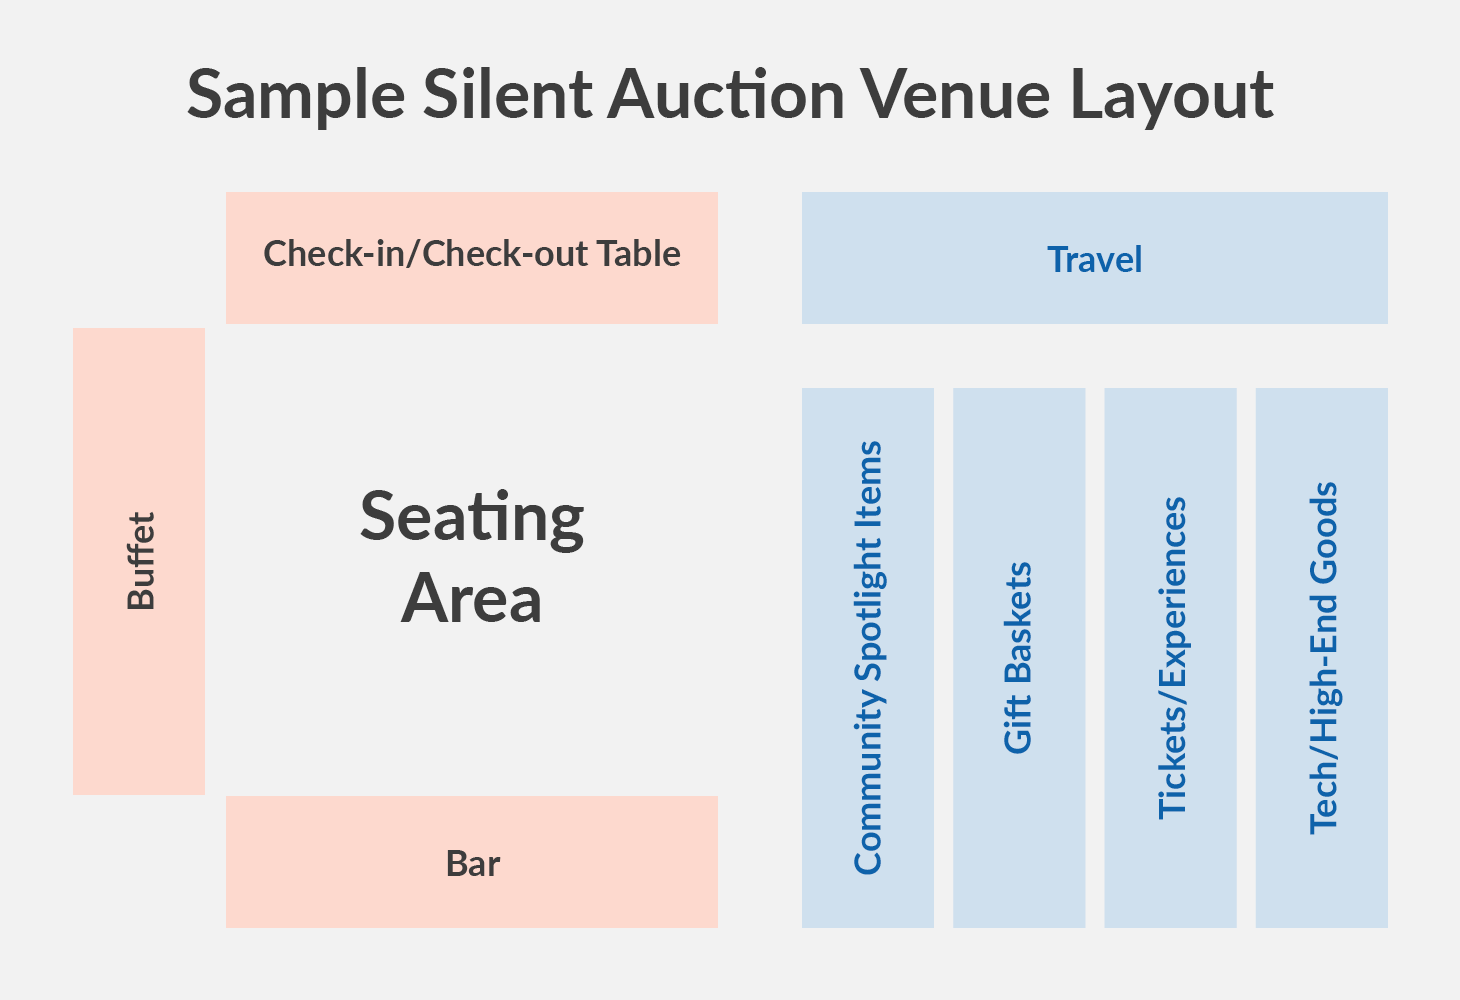 This is a sample sketch of an event venue layout to assist with silent auction display ideas for a nonprofit.